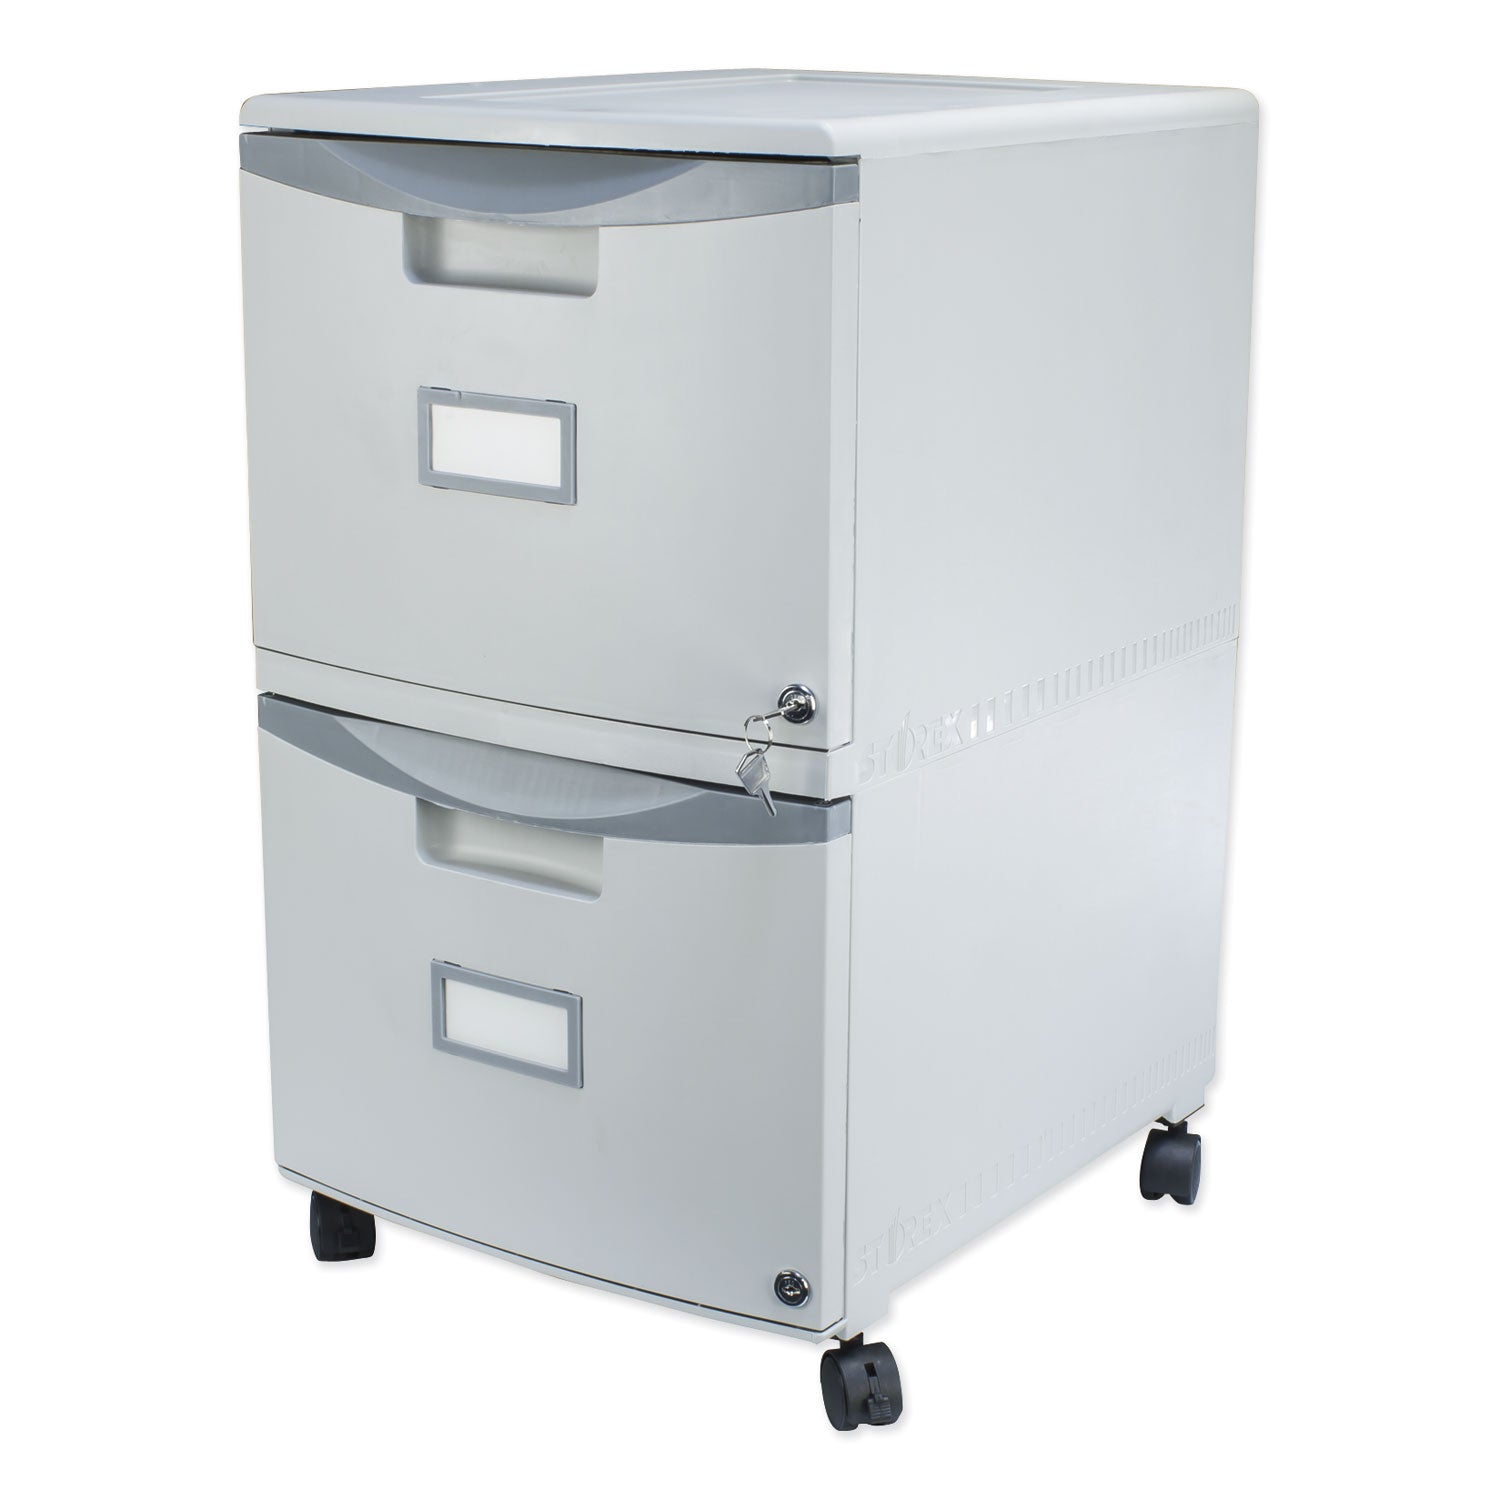 two-drawer-mobile-filing-cabinet-2-legal-letter-size-file-drawers-gray-1475-x-1825-x-26_stx61310b01c - 2